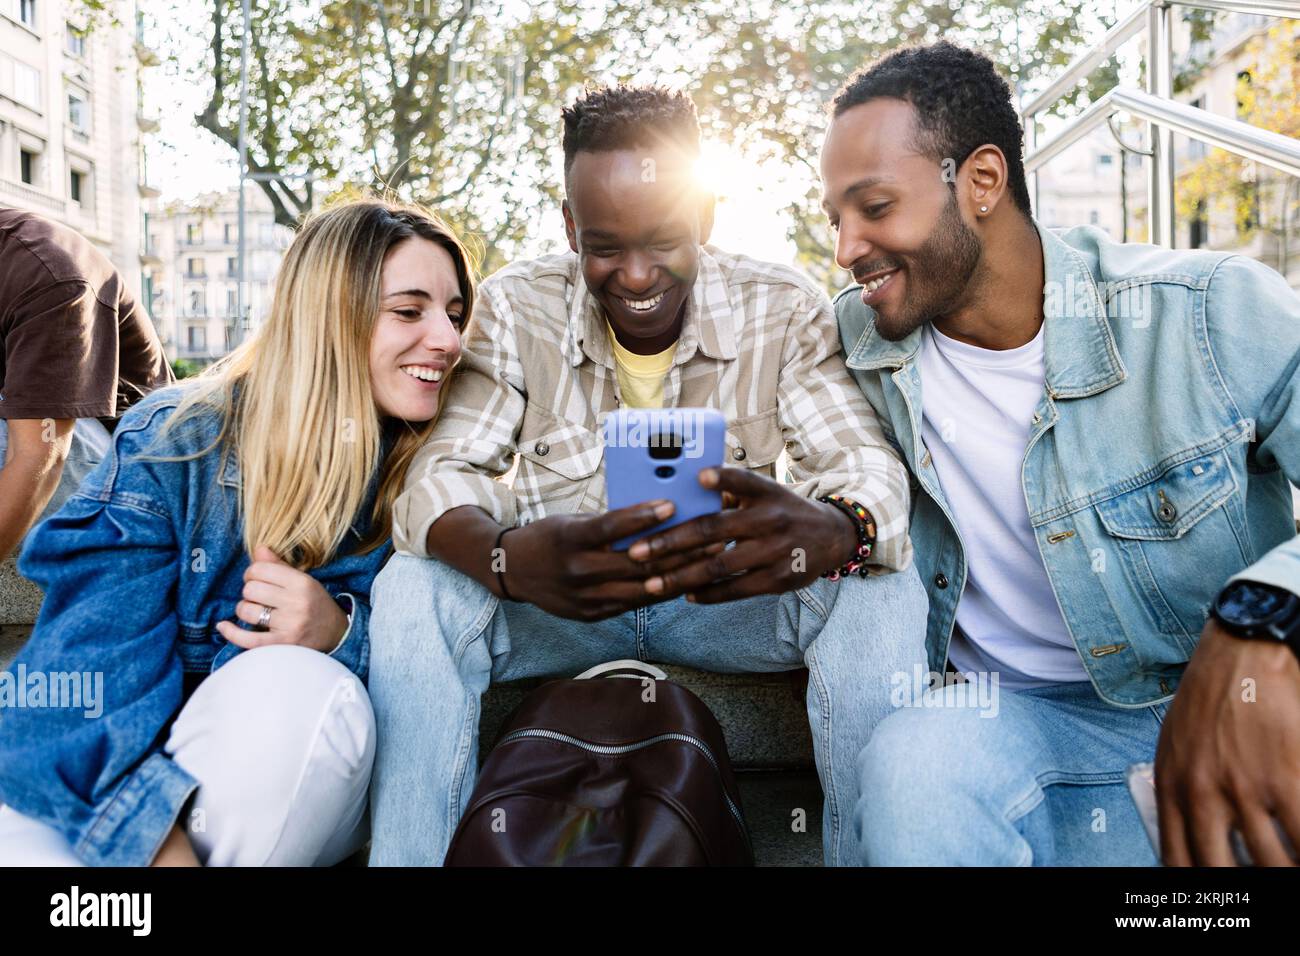 Group of multi-ethnic young friends using mobile phone sitting together outdoor Stock Photo